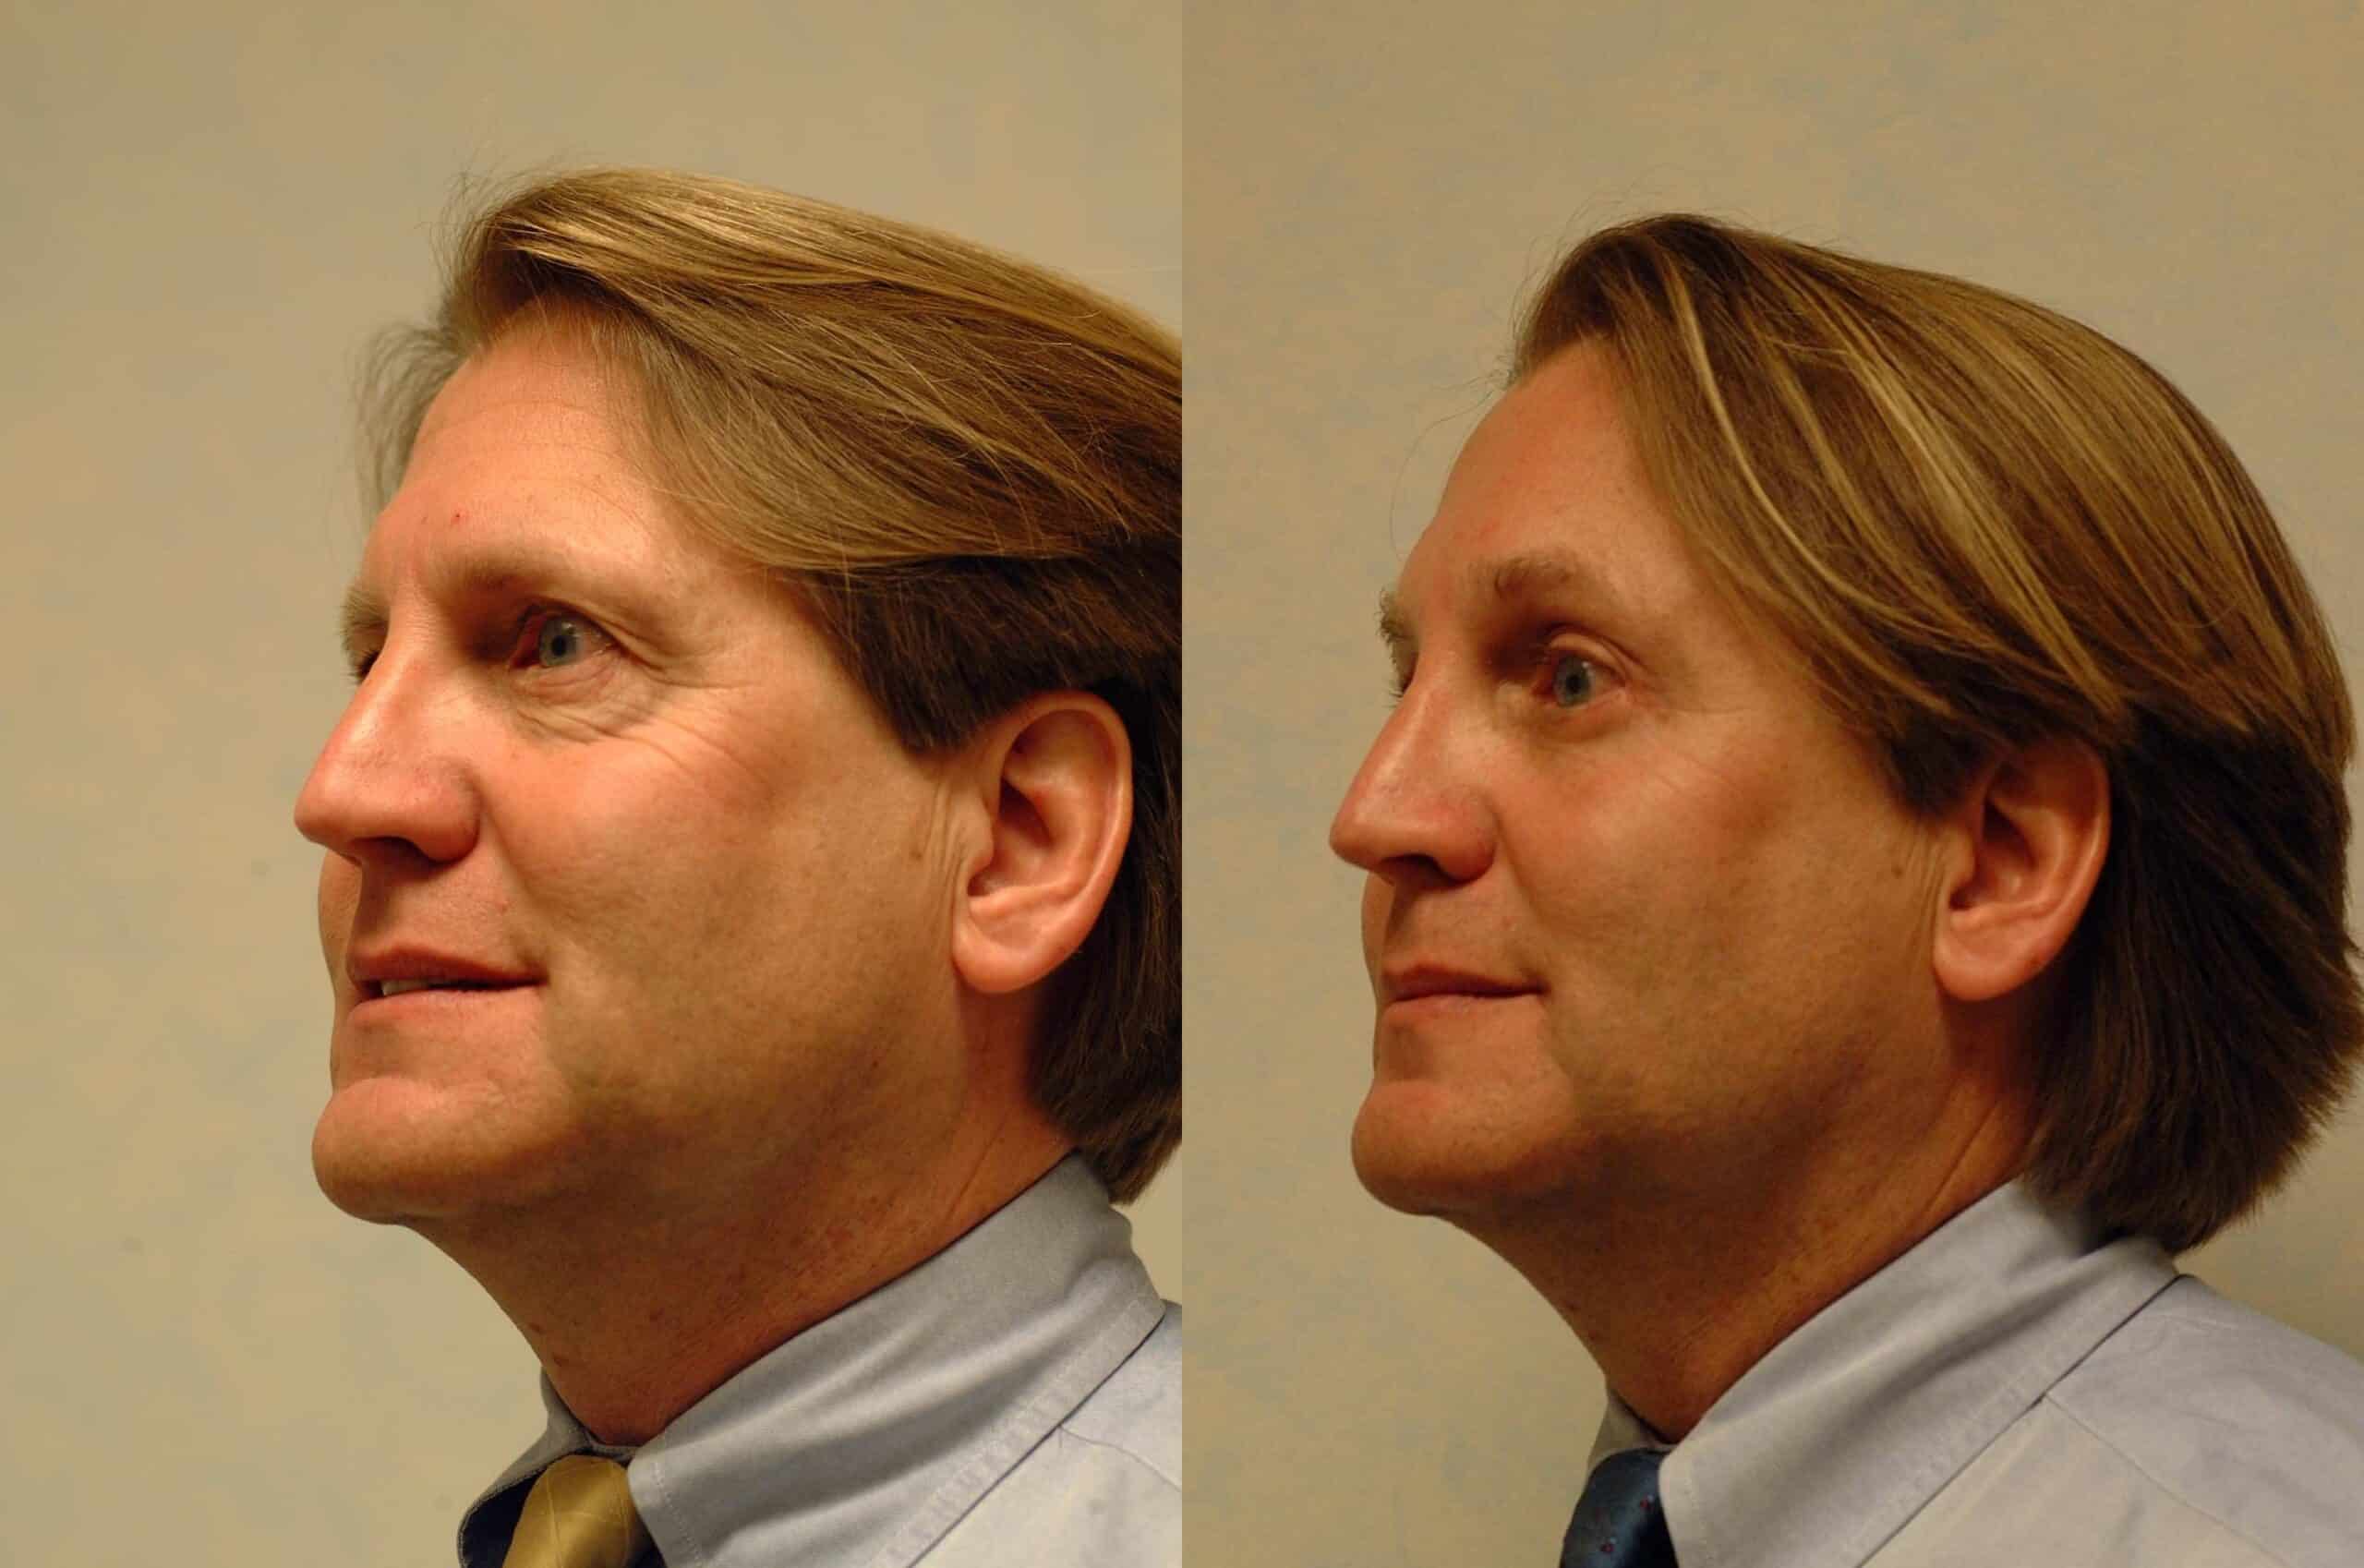 Before and after, 5 mo post op from Endo Brow Lift and Upper and Lower Blepharoplasty performed by Dr. Paul Vanek (diagonal view)